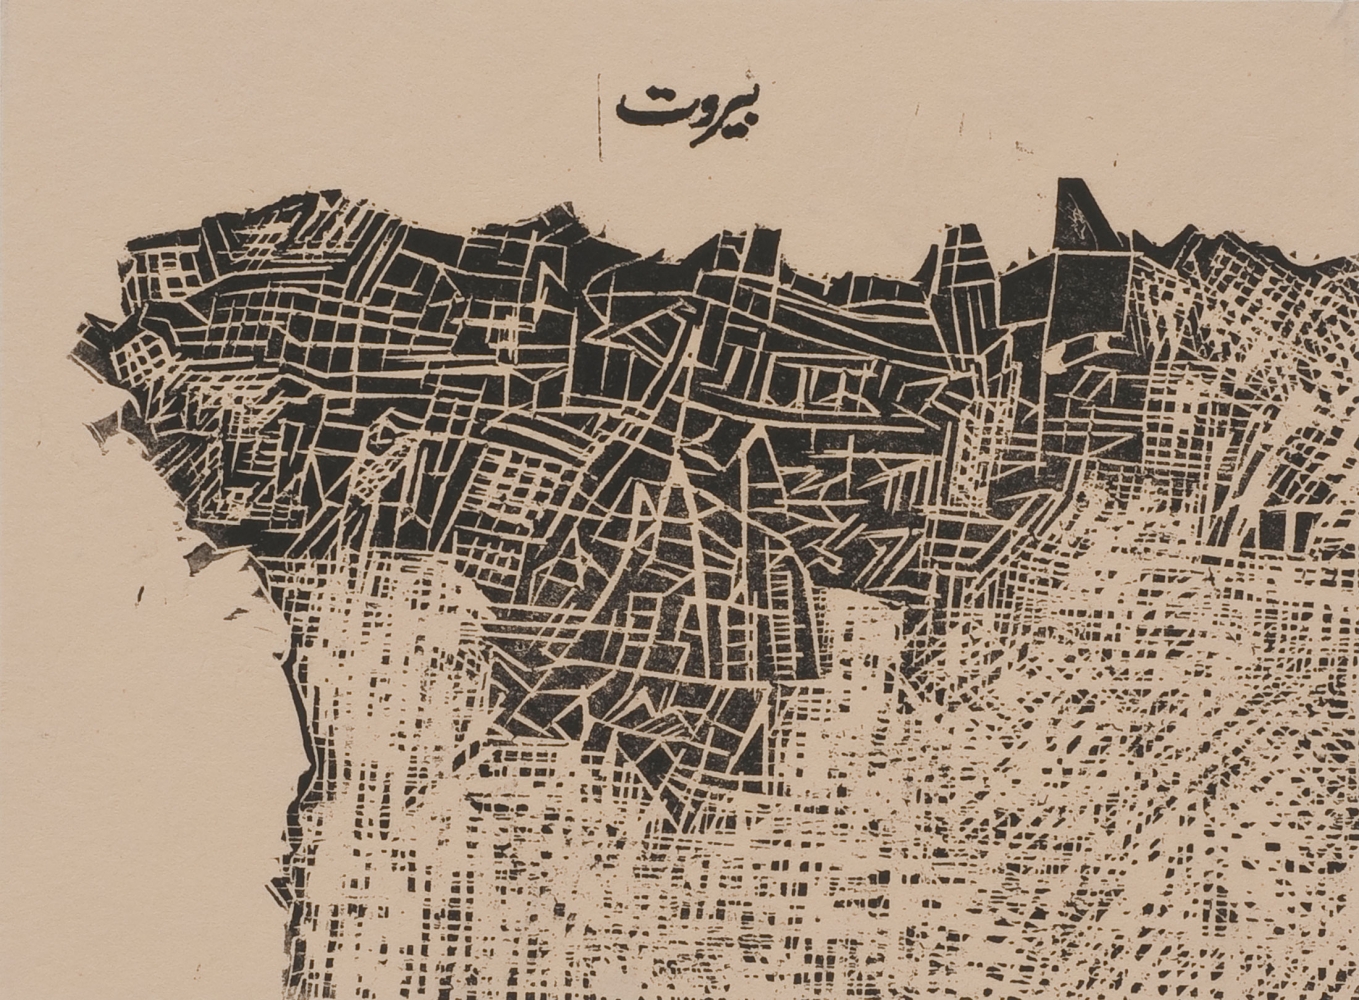 Zarina
These Cities Blotted into the Wilderness (Adrienne Rich after Ghalib), 2003
​Detail
Portfolio of nine woodcuts with Urdu text printed in black on Okawara paper and mounted on Somerset paper
Edition of 20
Image size: variable
Sheet size: 16 x 14 inches (40.64 x 35.56 cm)